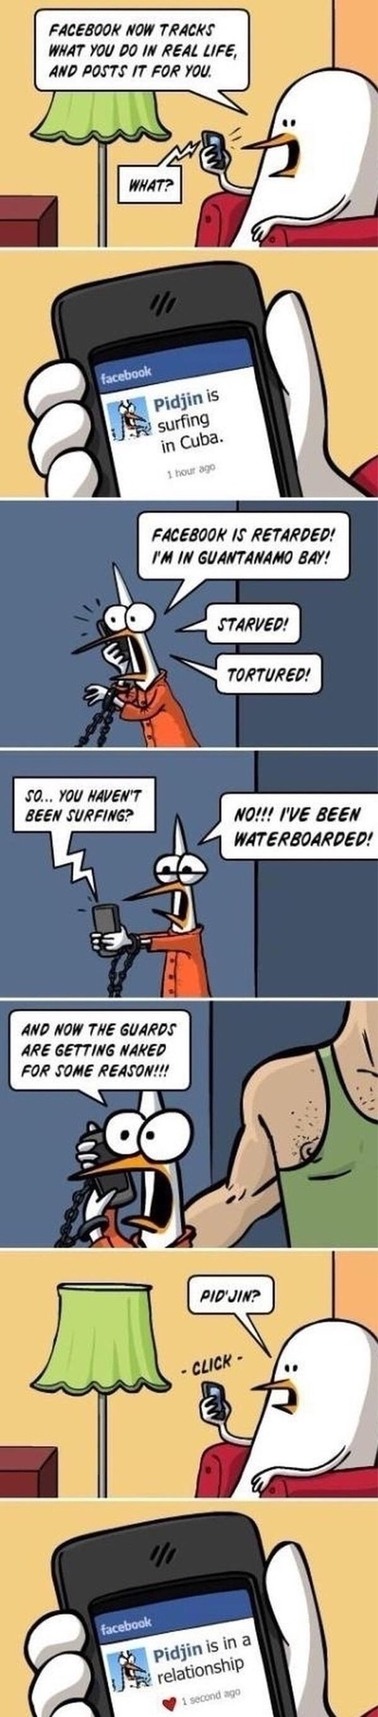 Waterboarding in Guantanamo Bay sounds cool unless you know what it means - meme